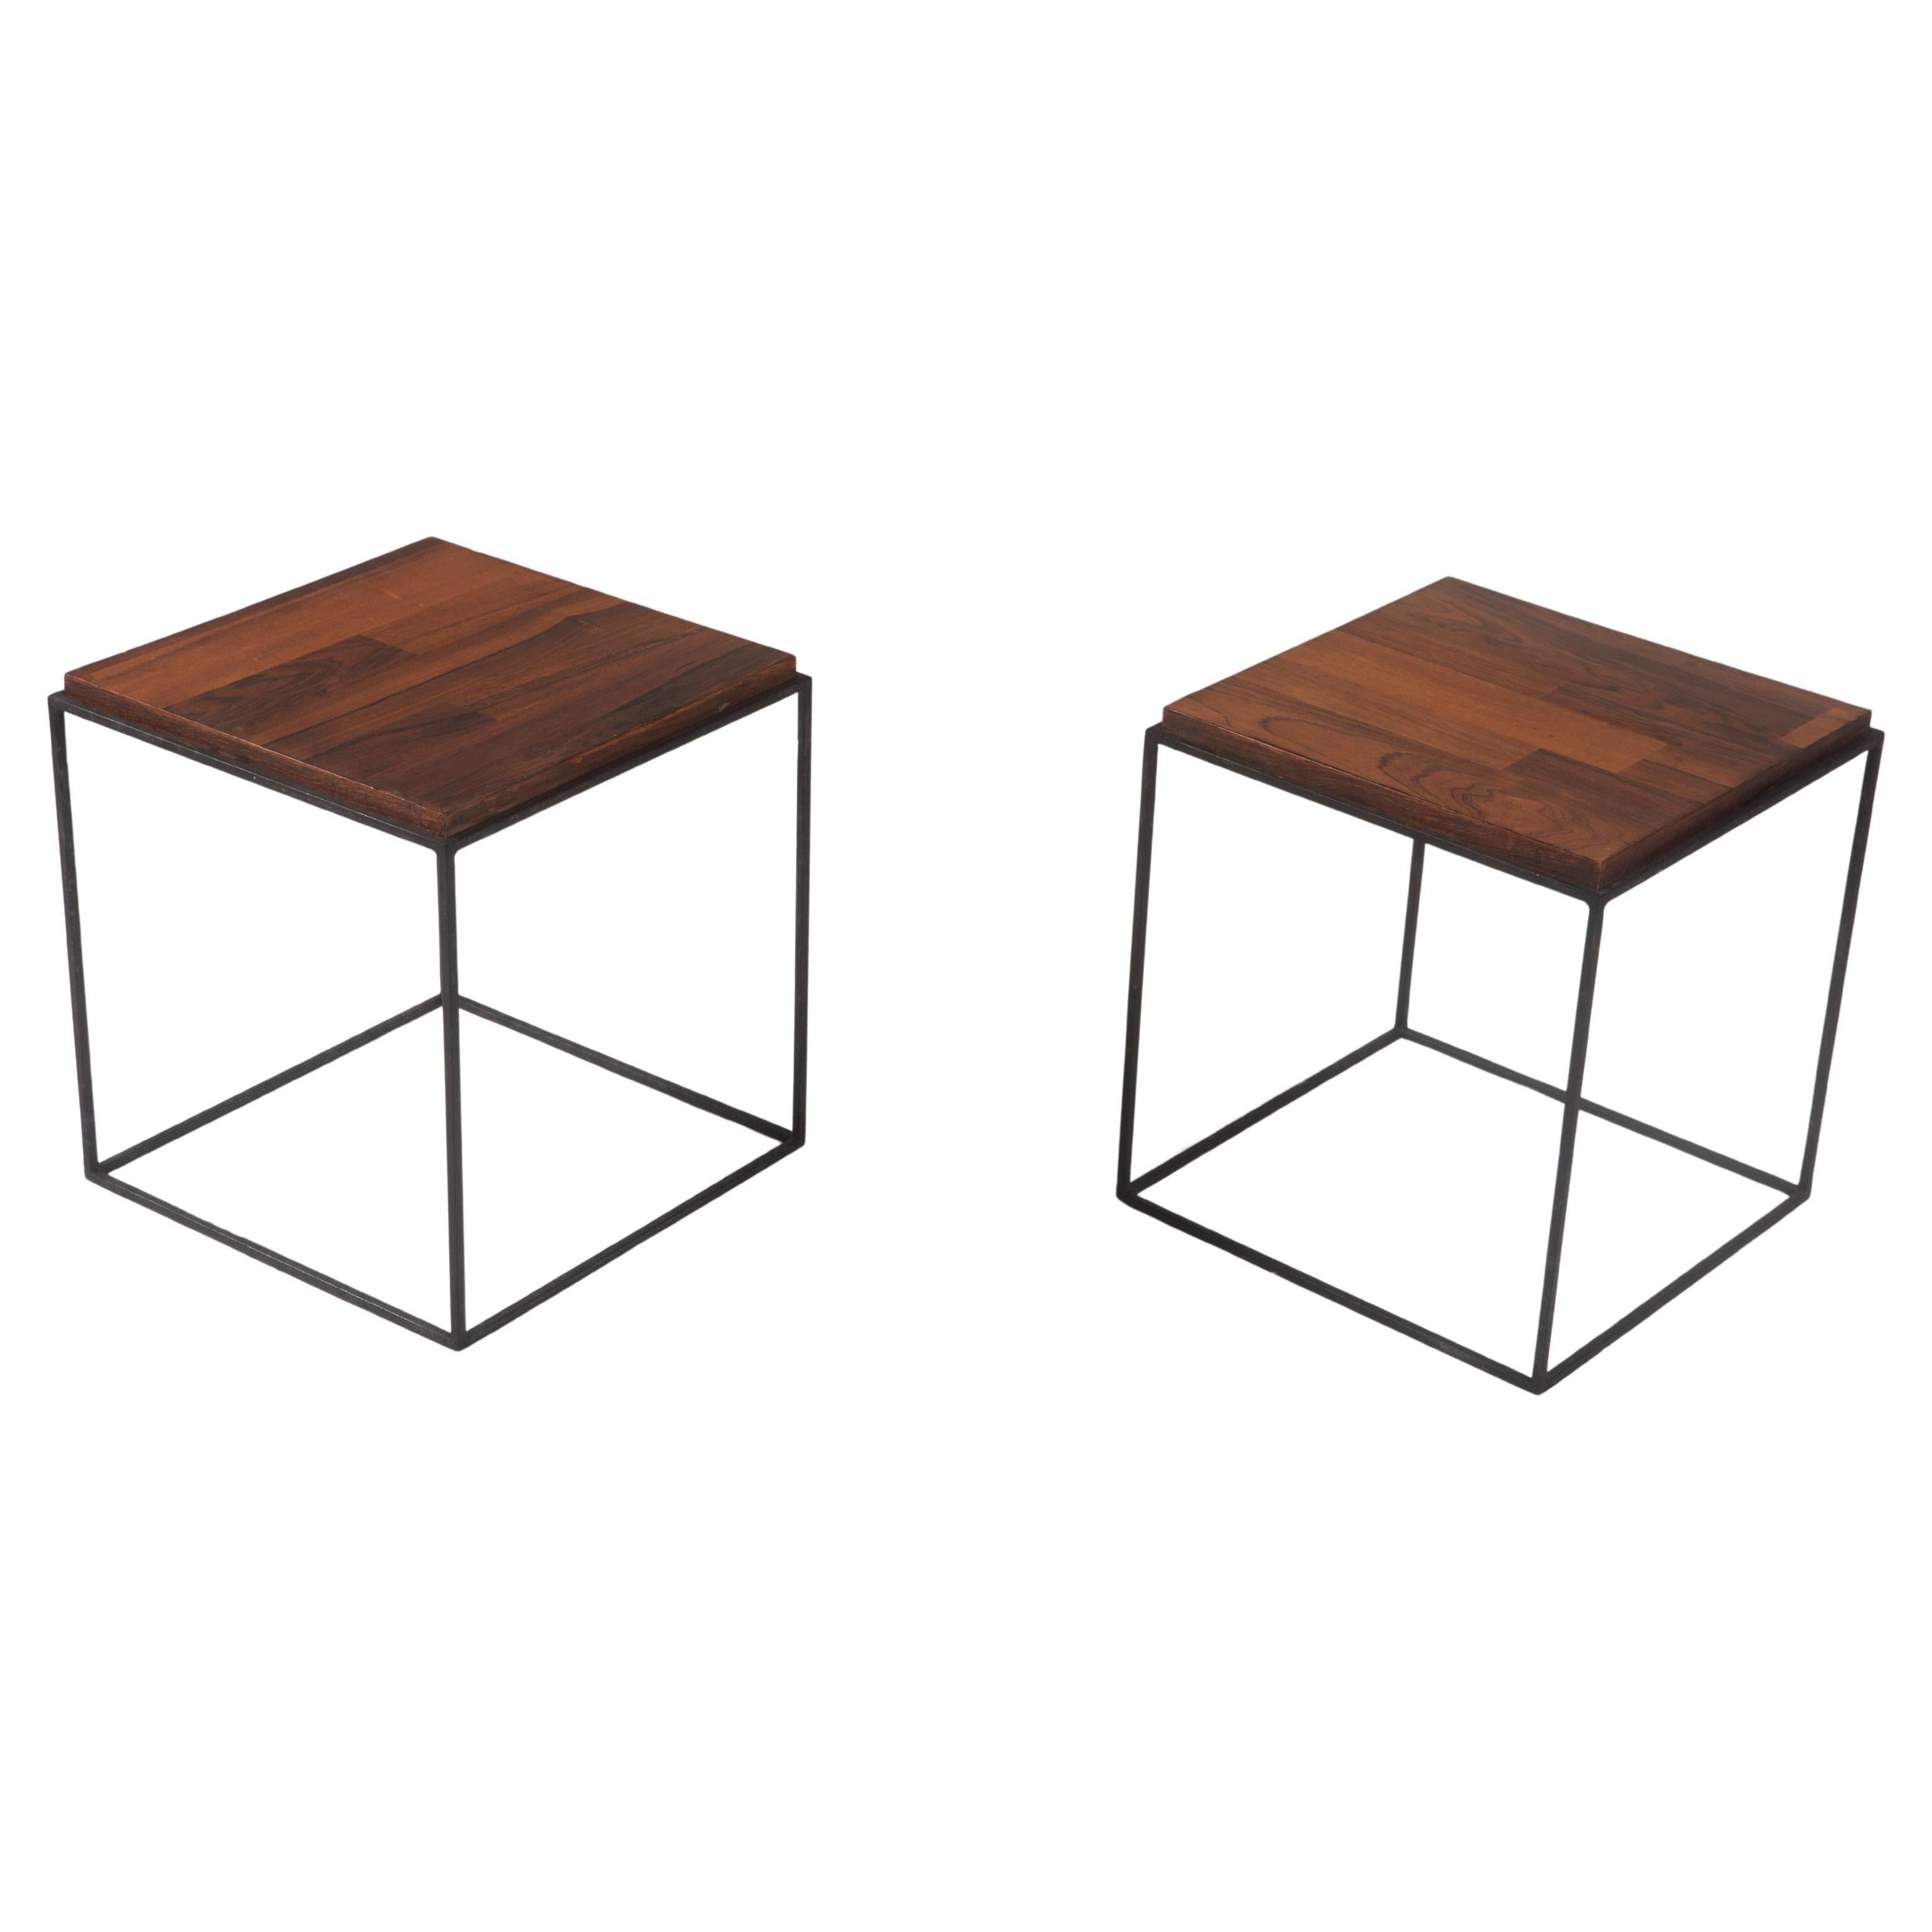 Pair of Side Tables by Brazilian Designer, 1960s